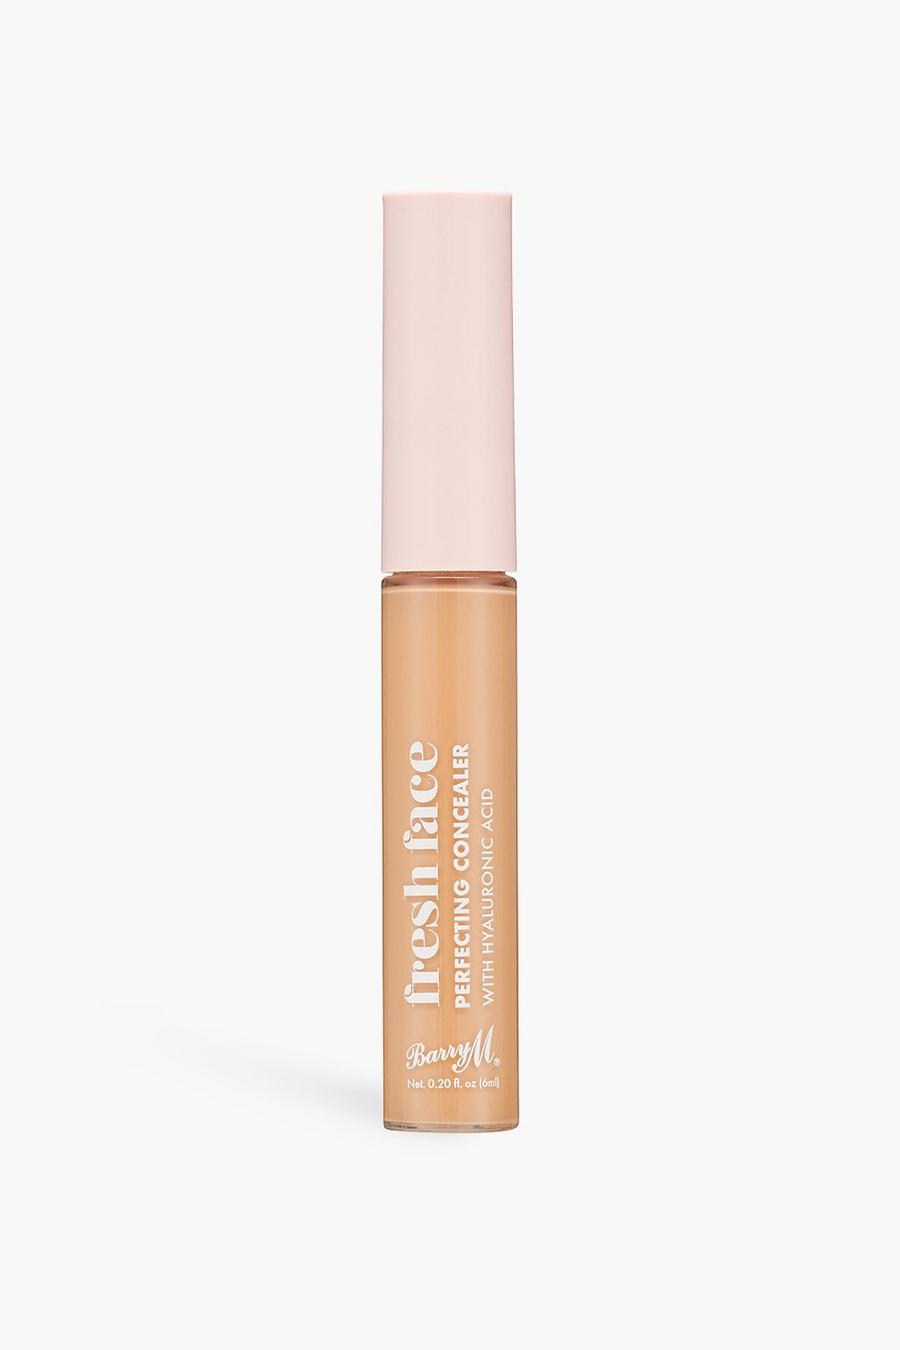 Tan brown Barry M Fresh Face Perfecting Concealer 7